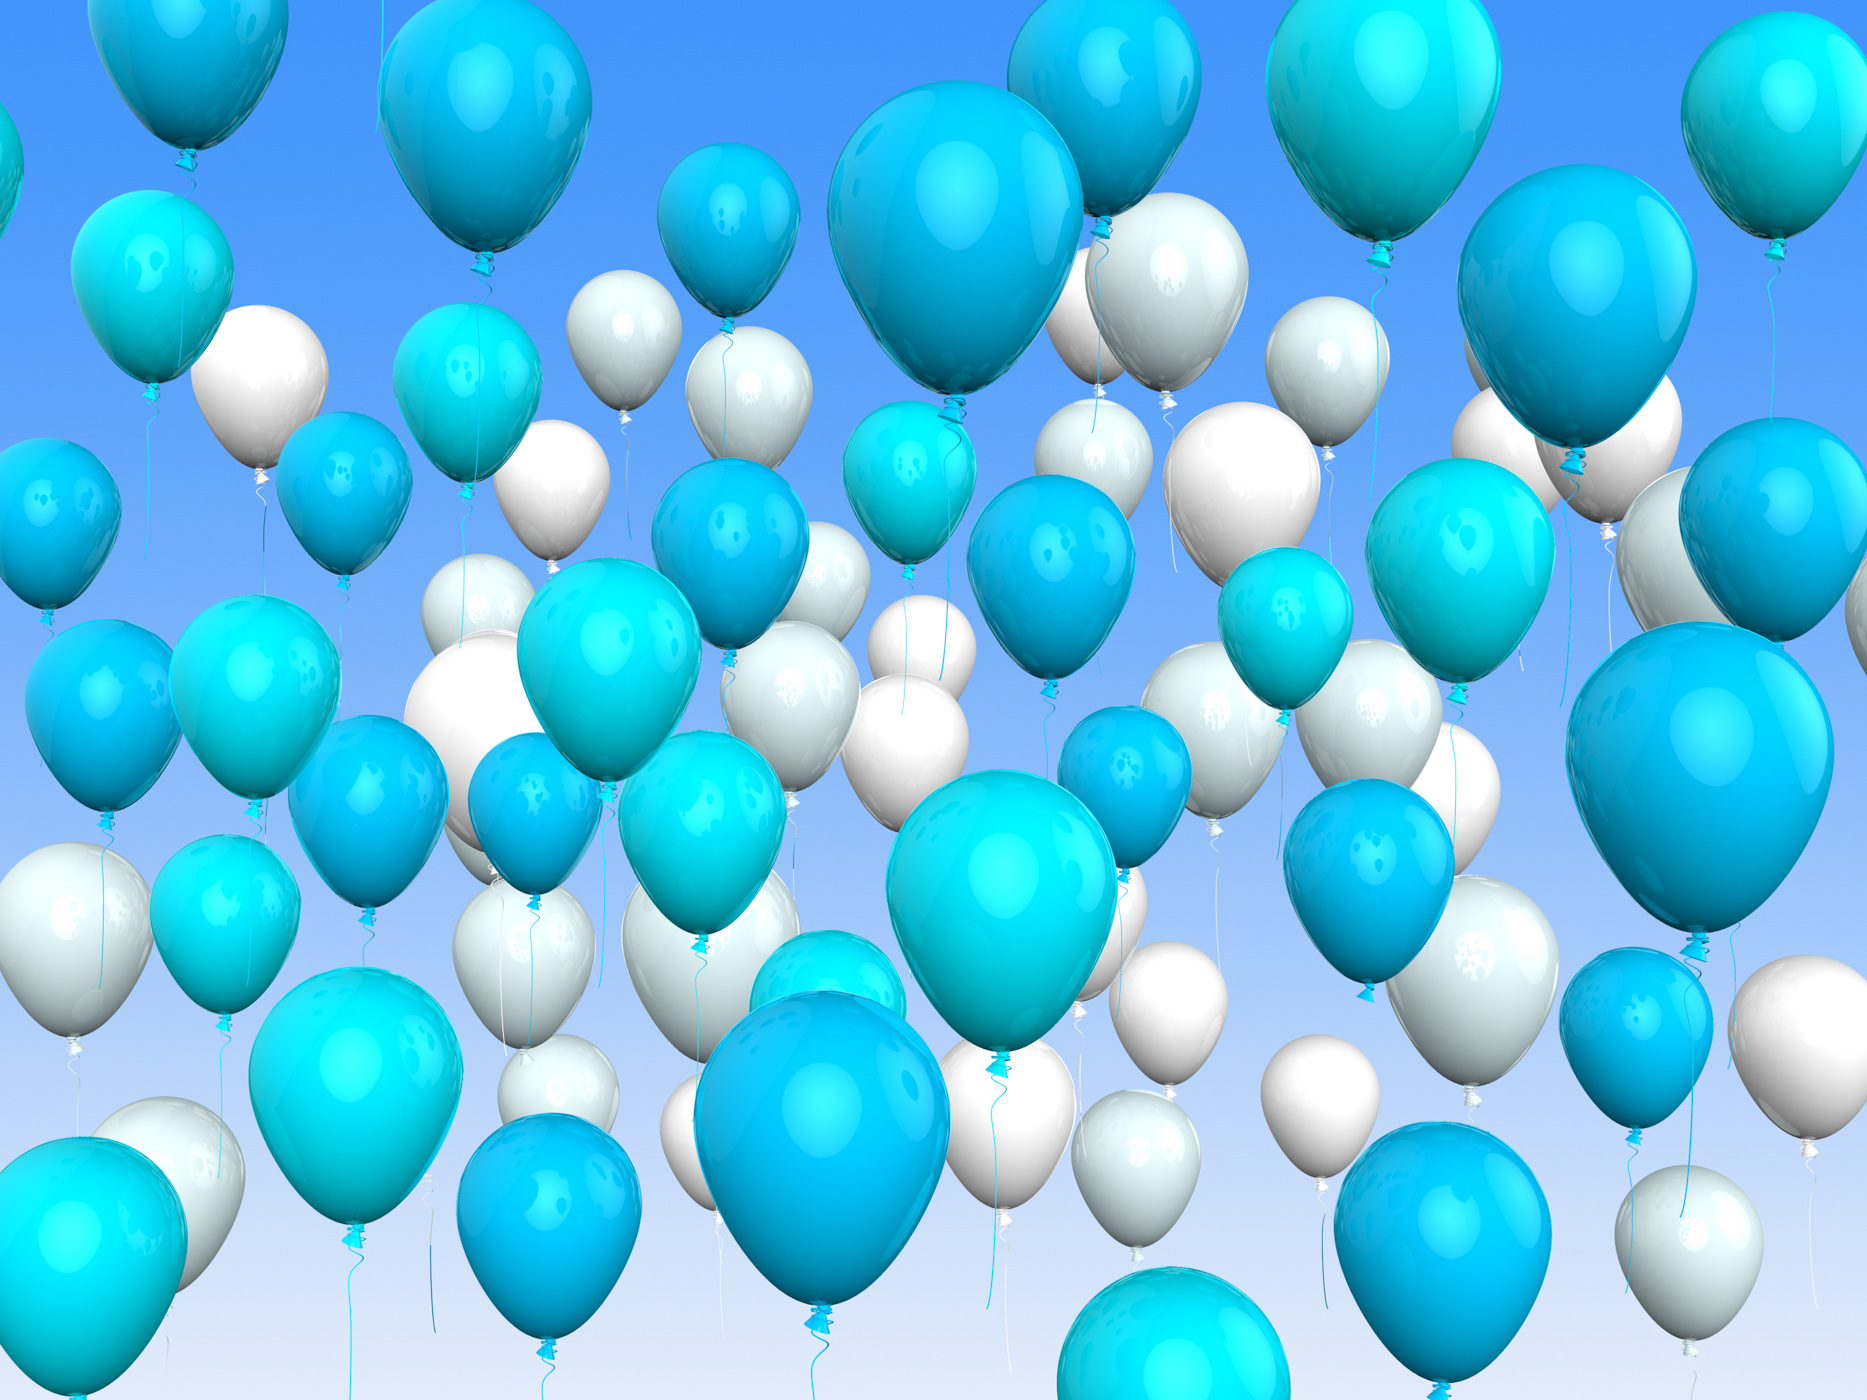 Floating light blue and white balloons mean argentinean flag or festiv photo